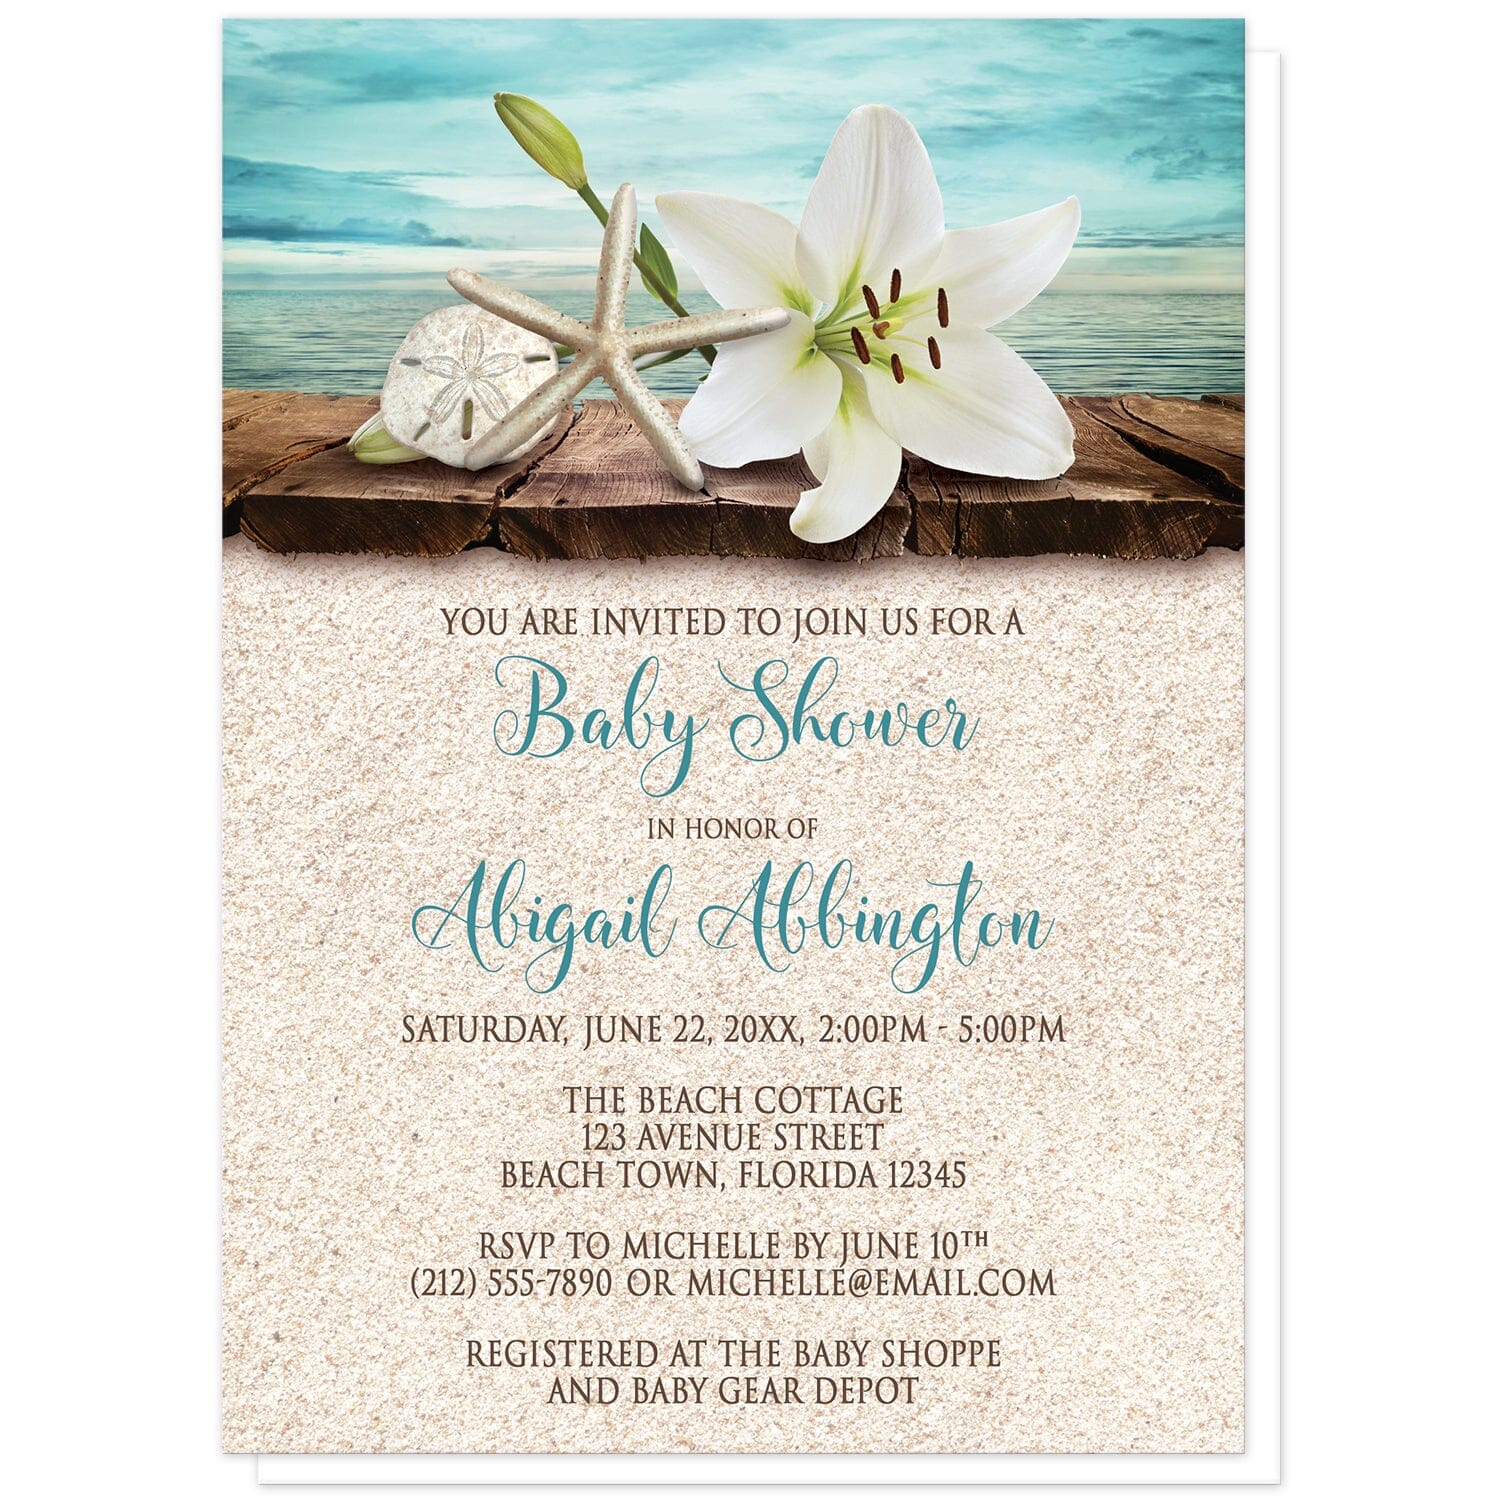 Lily Seashells and Sand Beach Baby Shower Invitations